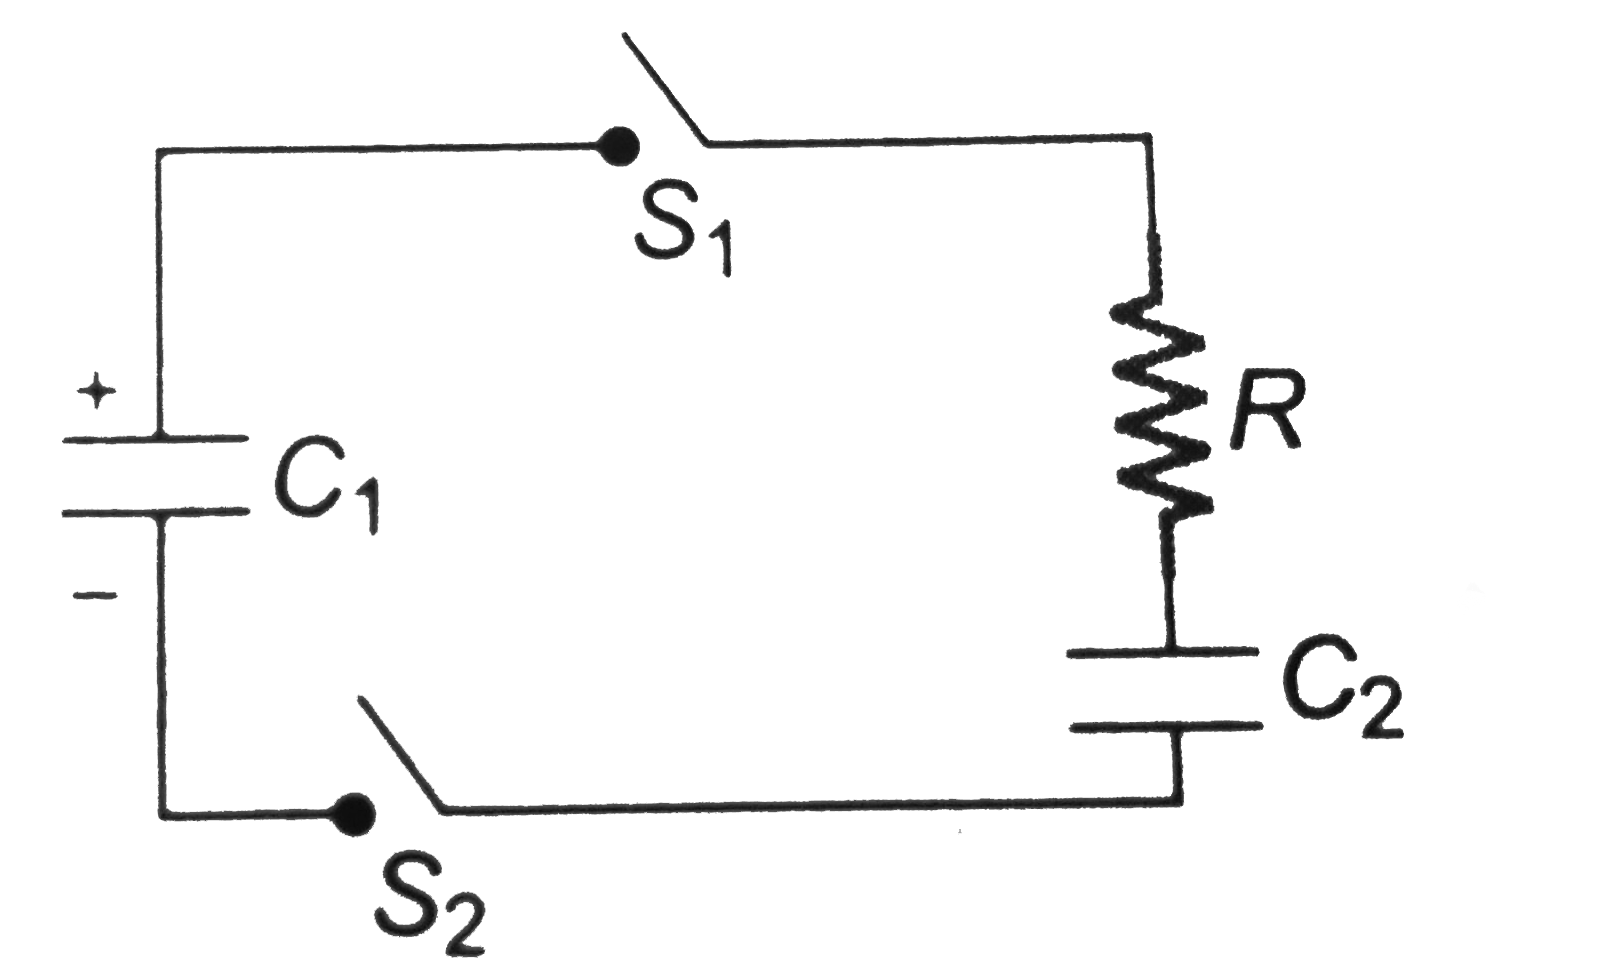 The capactor C1 in the figure initially carries a charge q0. When the i switch S1 and S2 are closed, capacitor C1 is connected to a resistor R and a second capacitor C2, which initially does not carry any charge.   (a) Find the charges deposited on the capacitors in steady state and the current through R as a function of time.   (b) What is heat lost in the resistor after a long time of closing the switch?